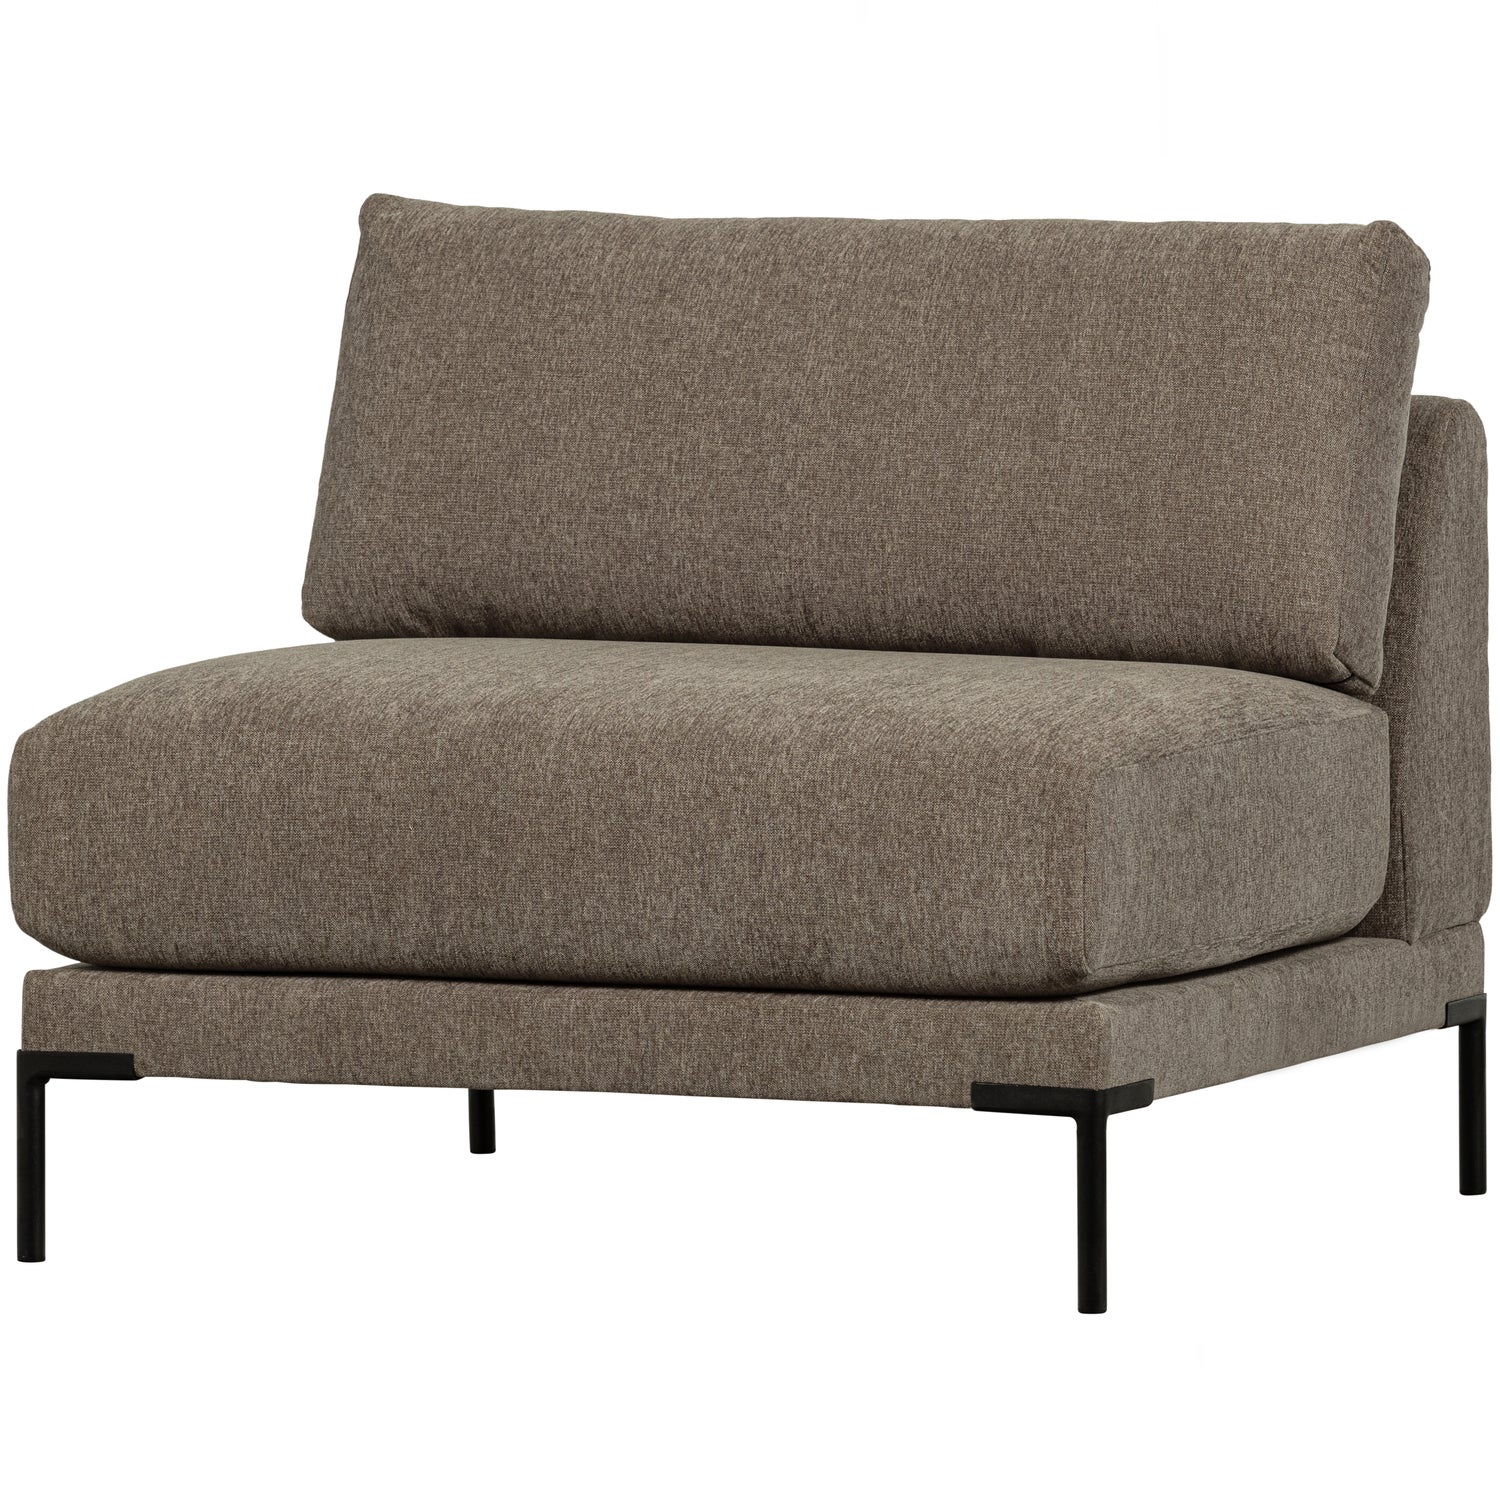 400486-T-02_VS_VT_Couple_loveseat_taupe_EA.jpg?auto=webp&format=png&width=1500&height=1500